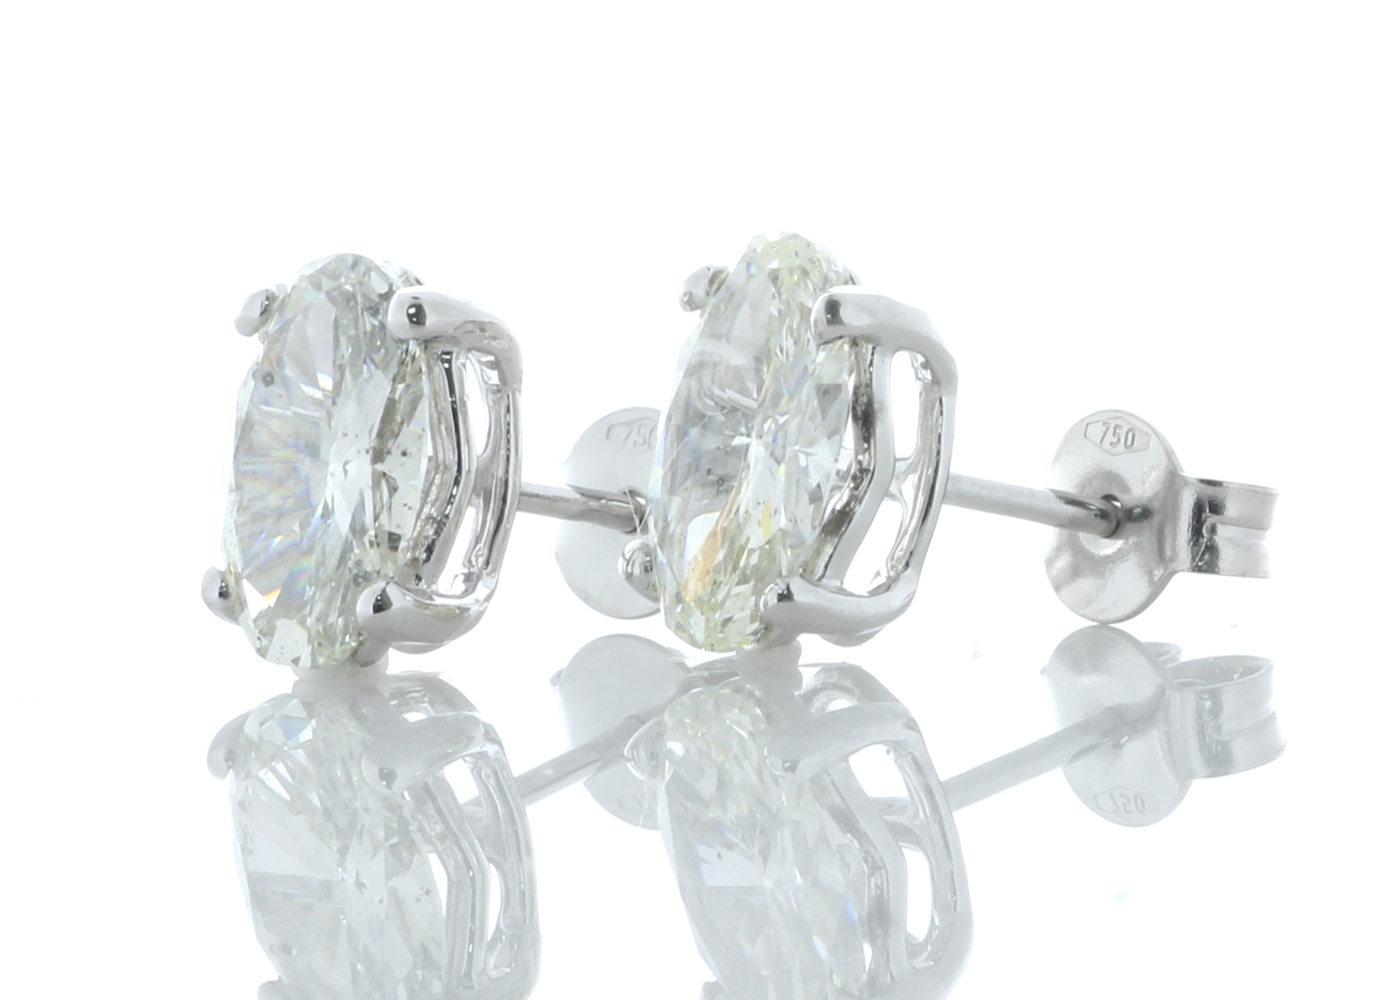 18ct White Gold Single Stone Oval Cut Diamond Earring 2.55 Carats - Valued By AGI £77,230.00 - Two - Image 3 of 4